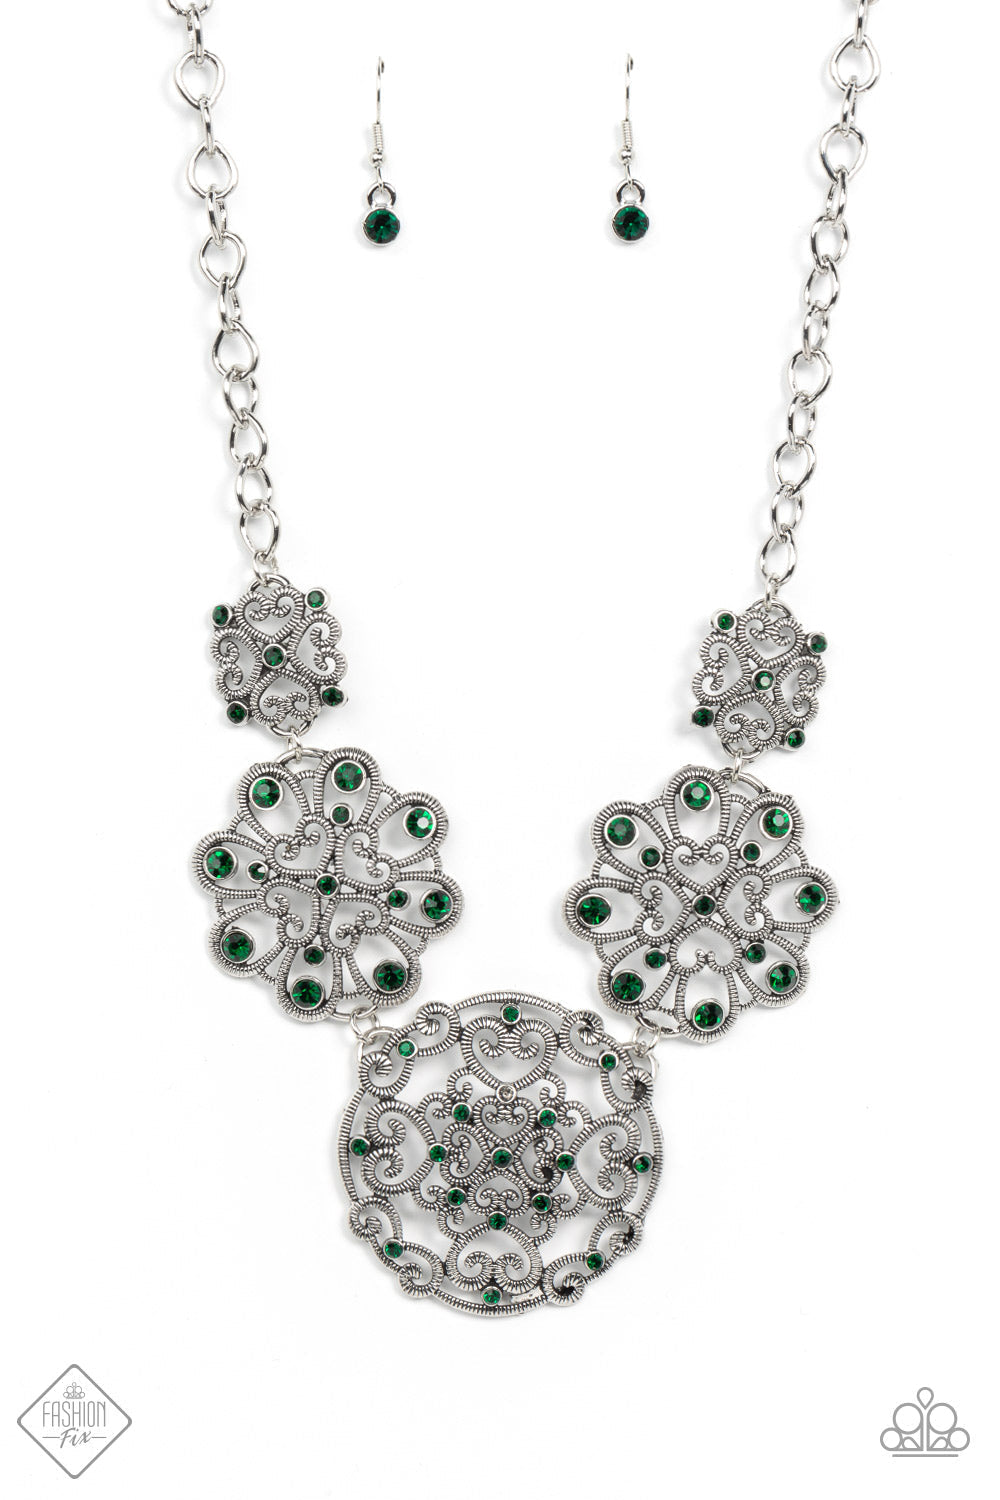 Royally Romantic - Green and Silver Fashion Necklace - Paparazzi Accessories - Exquisite heart motifs dotted with dainty emerald rhinestones coalesce into airy medallions that link to a modest silver chain for a stylish fashion necklace.